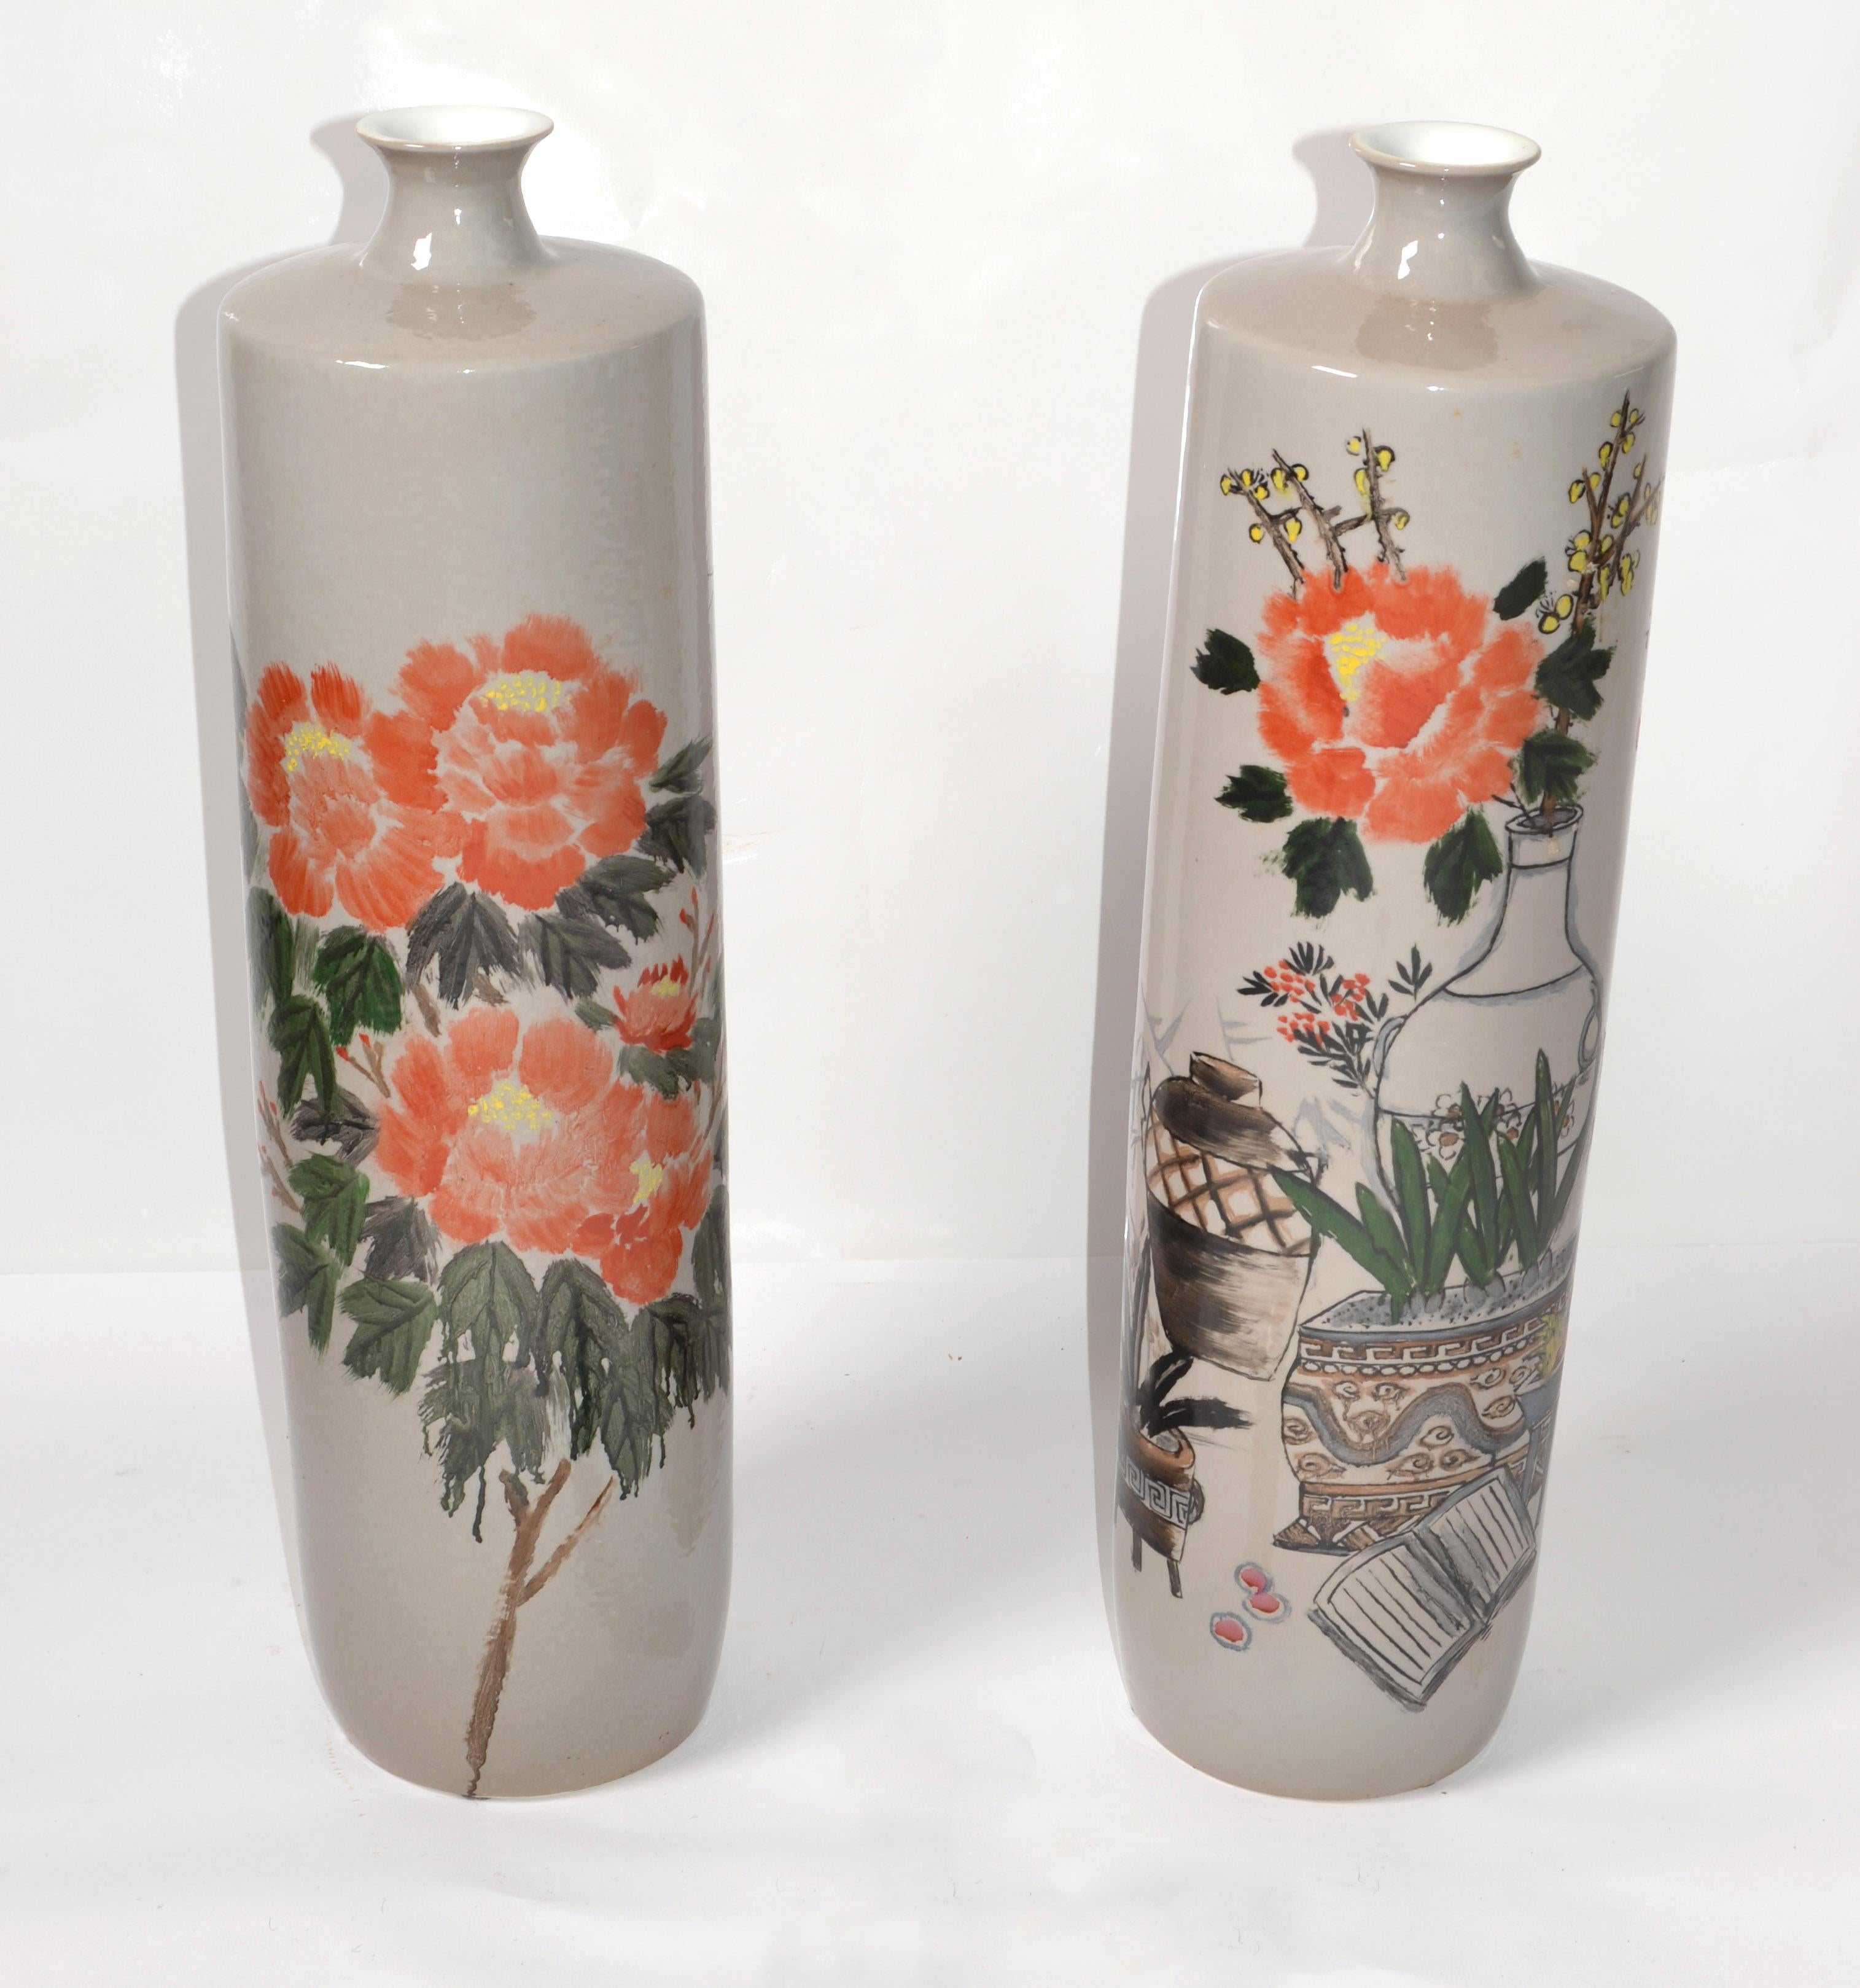 Set of 2 gorgeous chinoiserie gray table or floor vases featuring a classic Japanese orange green and brown flower decor.
Inside is white glazed 
The Set fits great to any Hollywood Regency or Art Deco Interior.